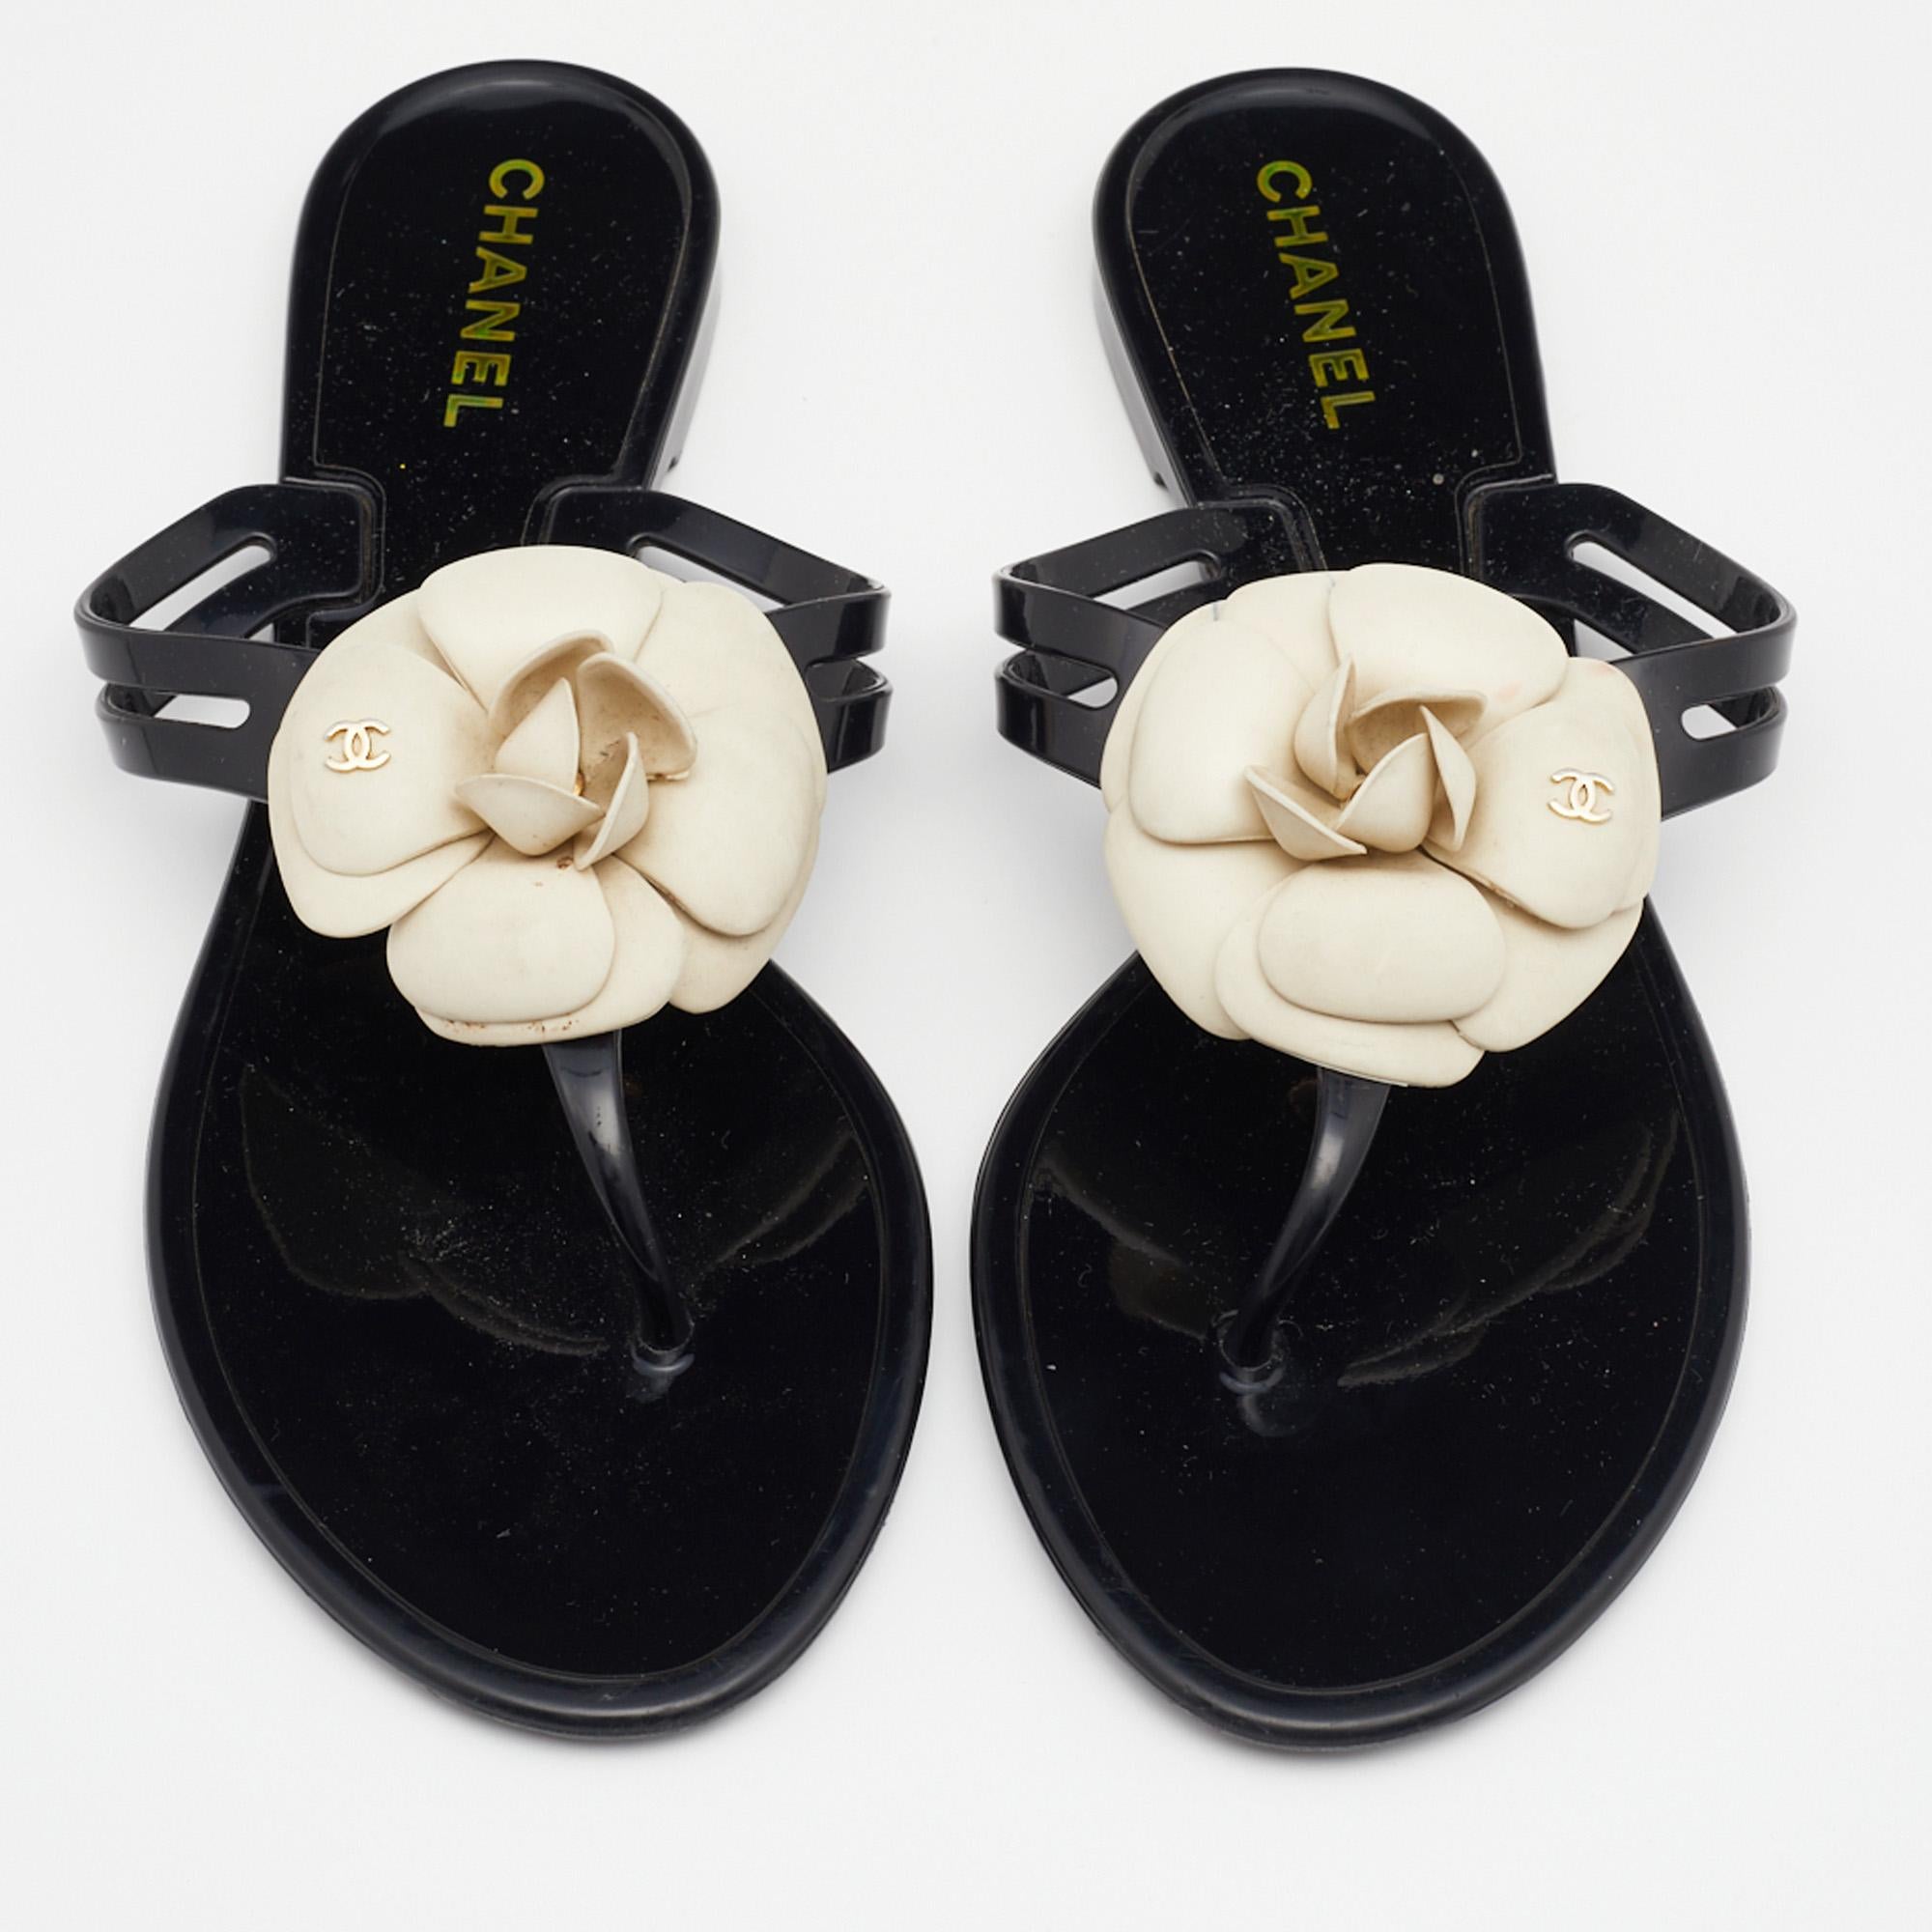 Experience total comfort and iconic style with these thong sandals from the House of Chanel. They are created using black jelly, with a contrasting Camellia motif perched on the upper. These thong sandals are embellished with gold-tone hardware and